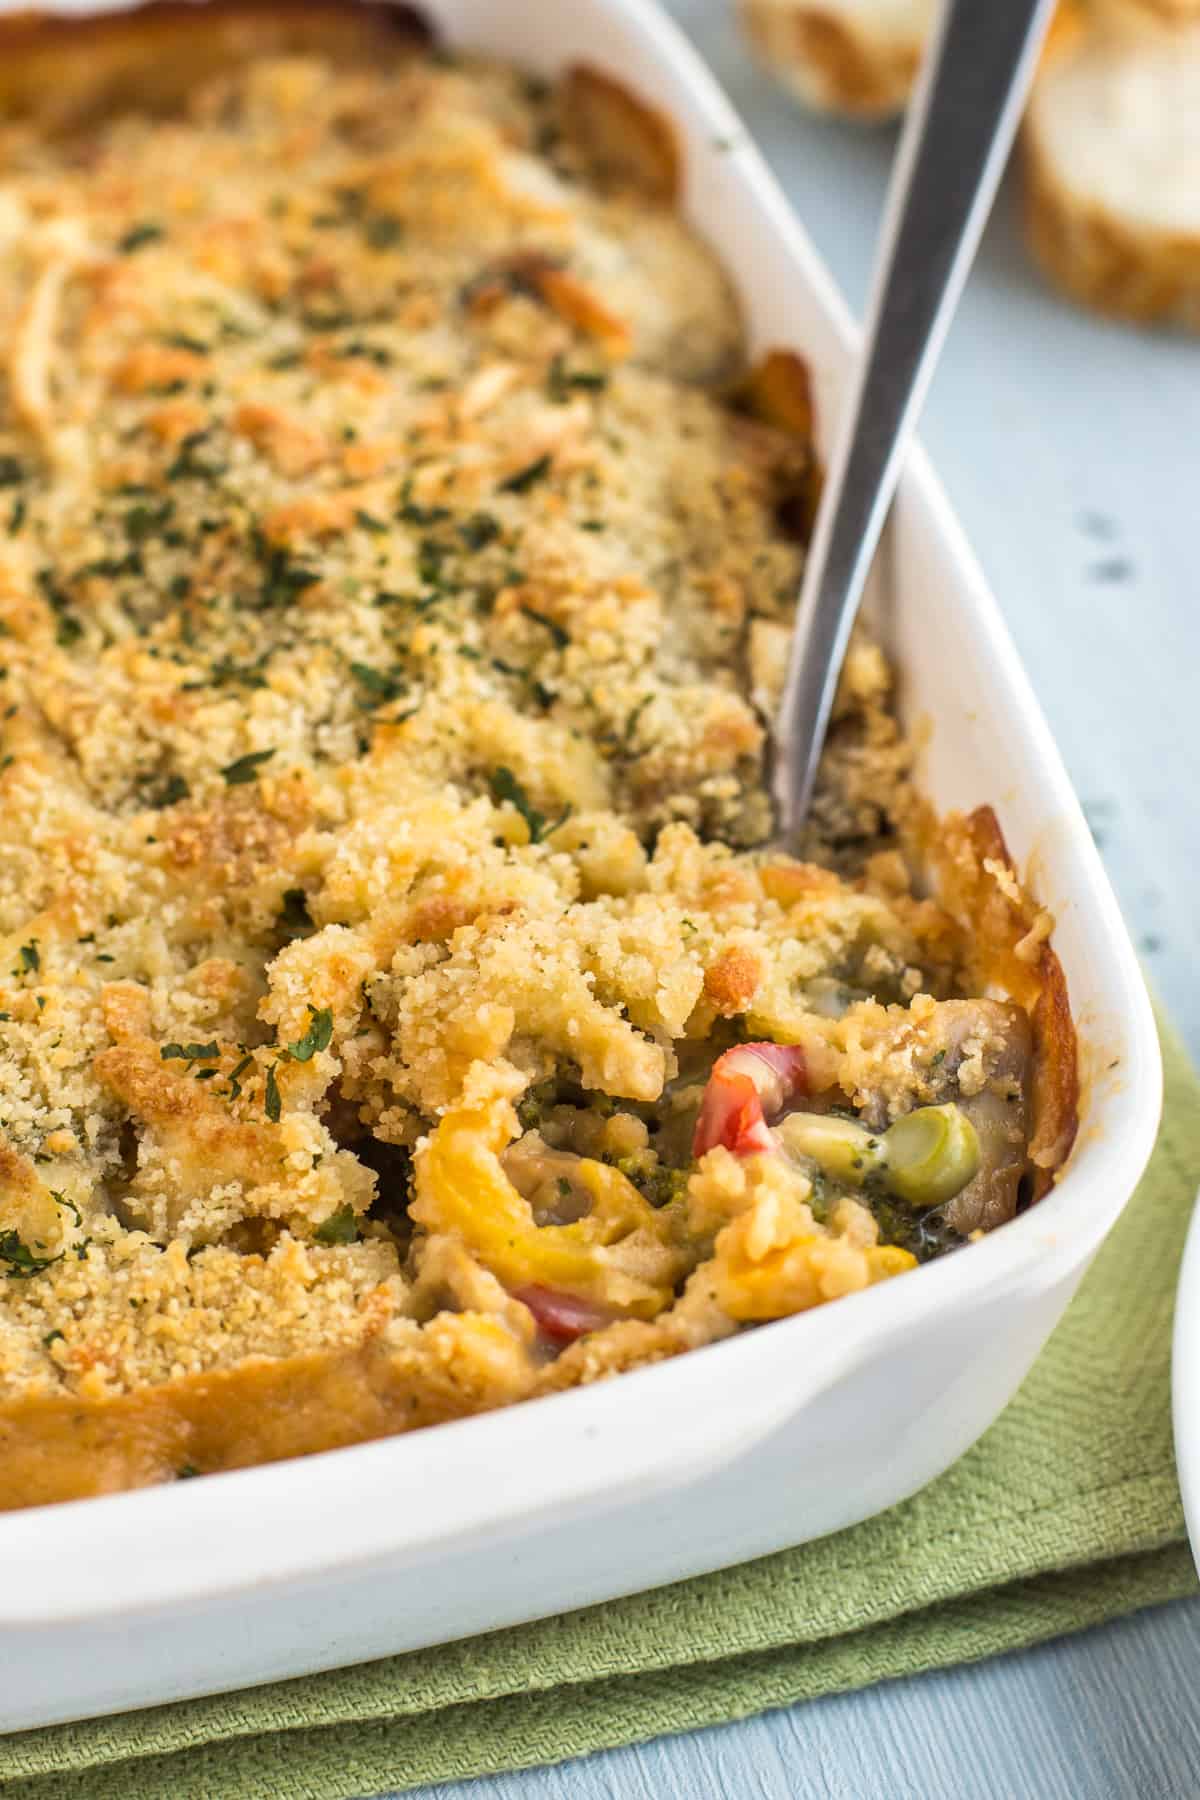 Creamy vegetable bake in a baking dish, with a scoop being removed.